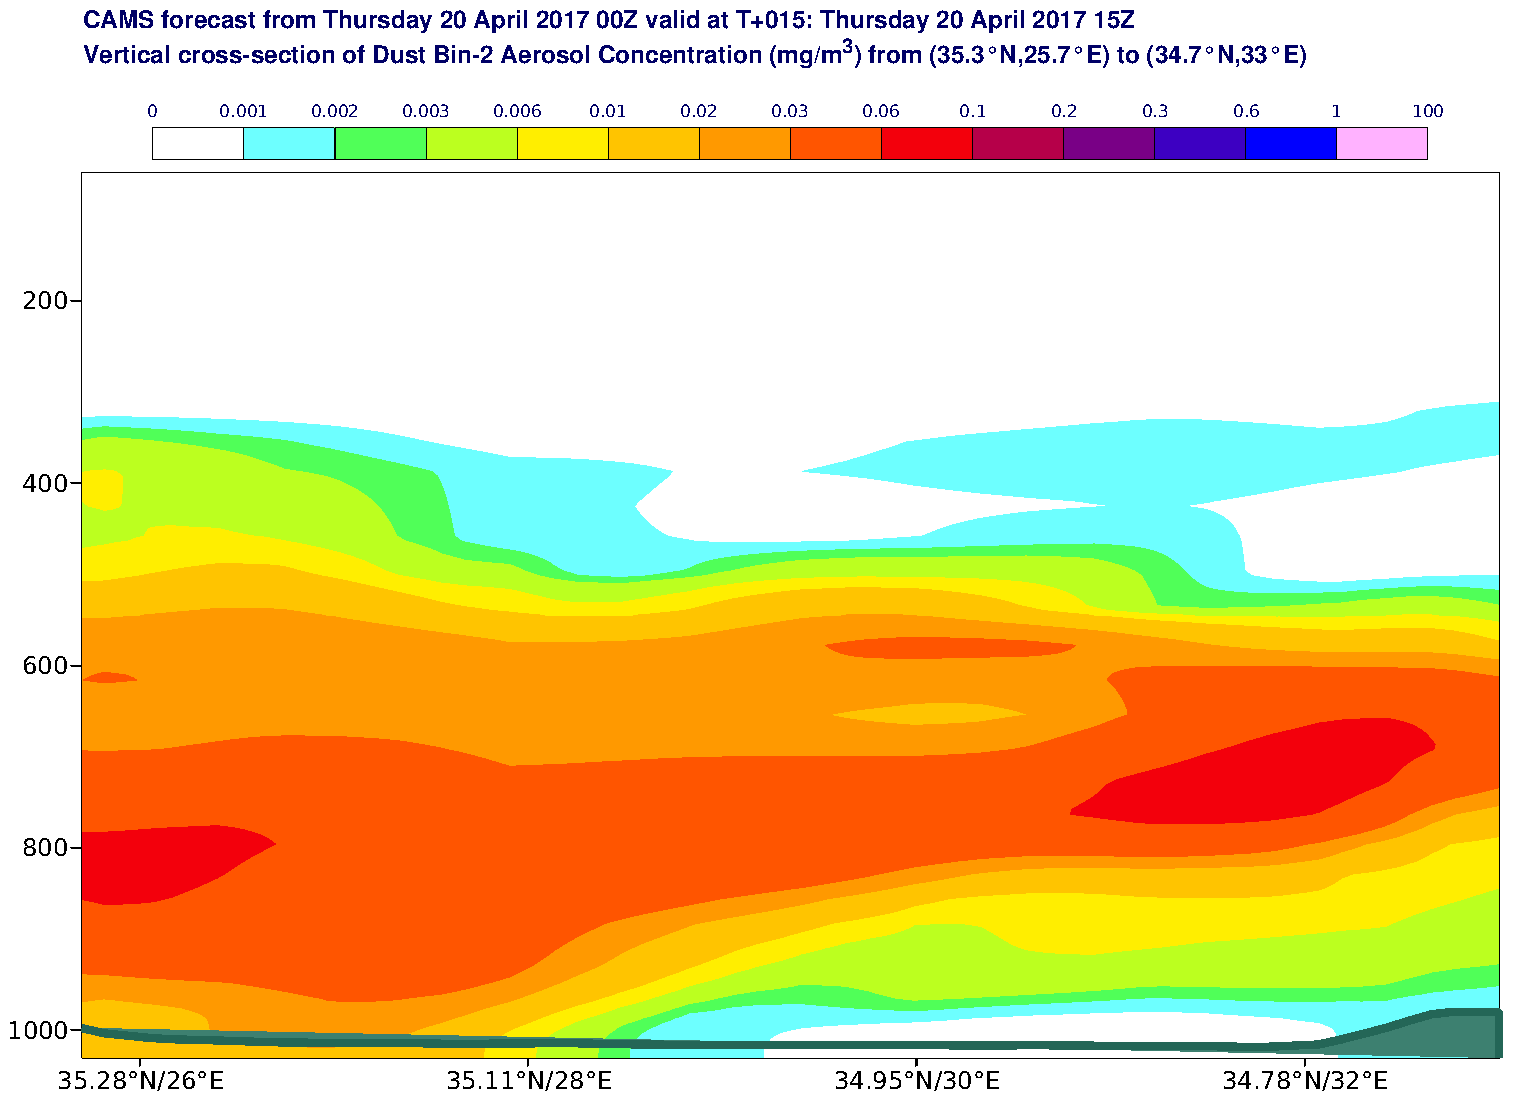 Vertical cross-section of Dust Bin-2 Aerosol Concentration (mg/m3) valid at T15 - 2017-04-20 15:00